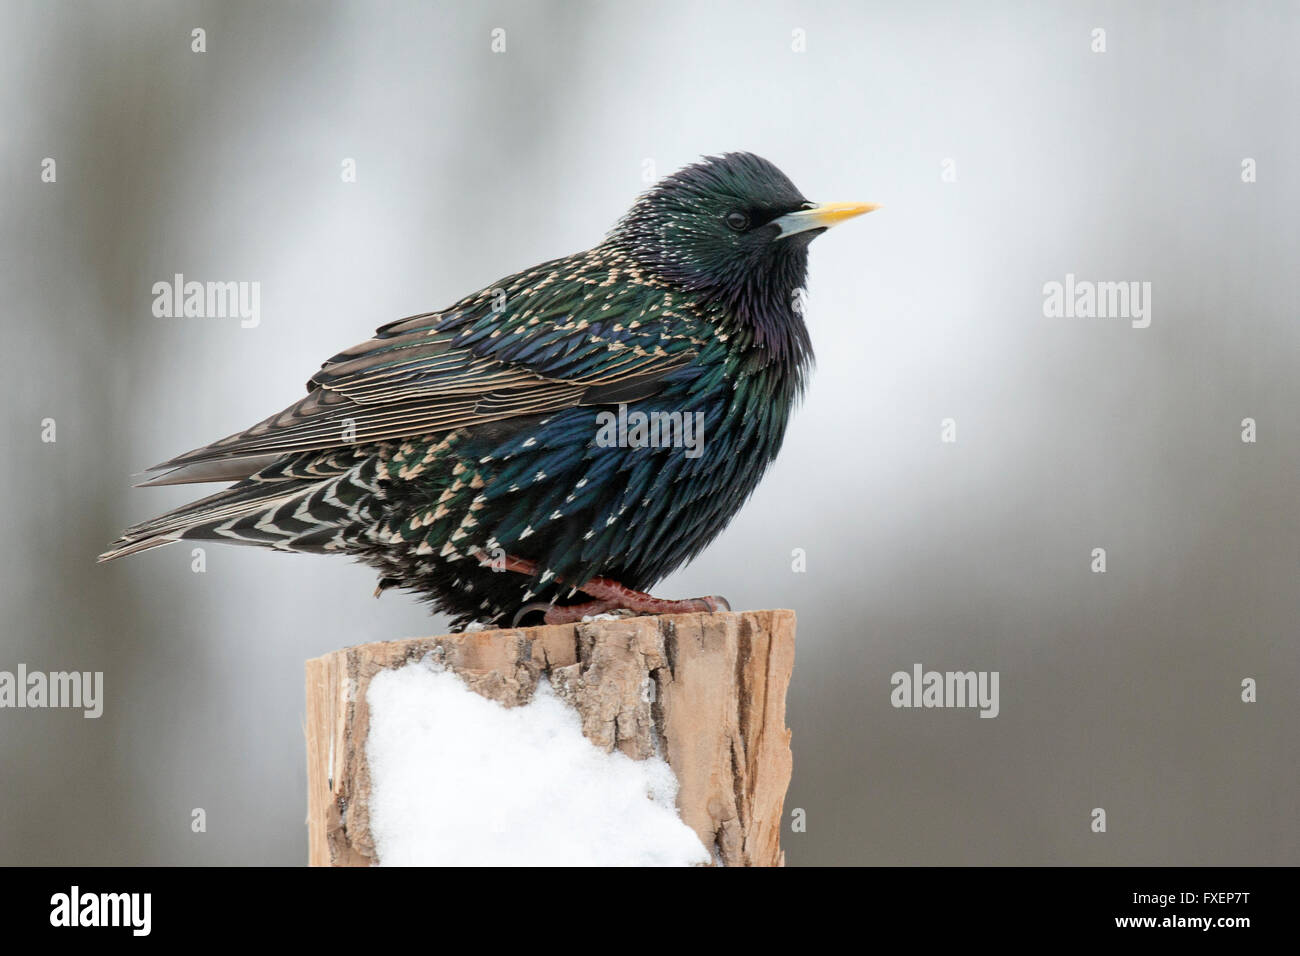 Content European starling ruffles feathers while perched on snowy fencepost Stock Photo